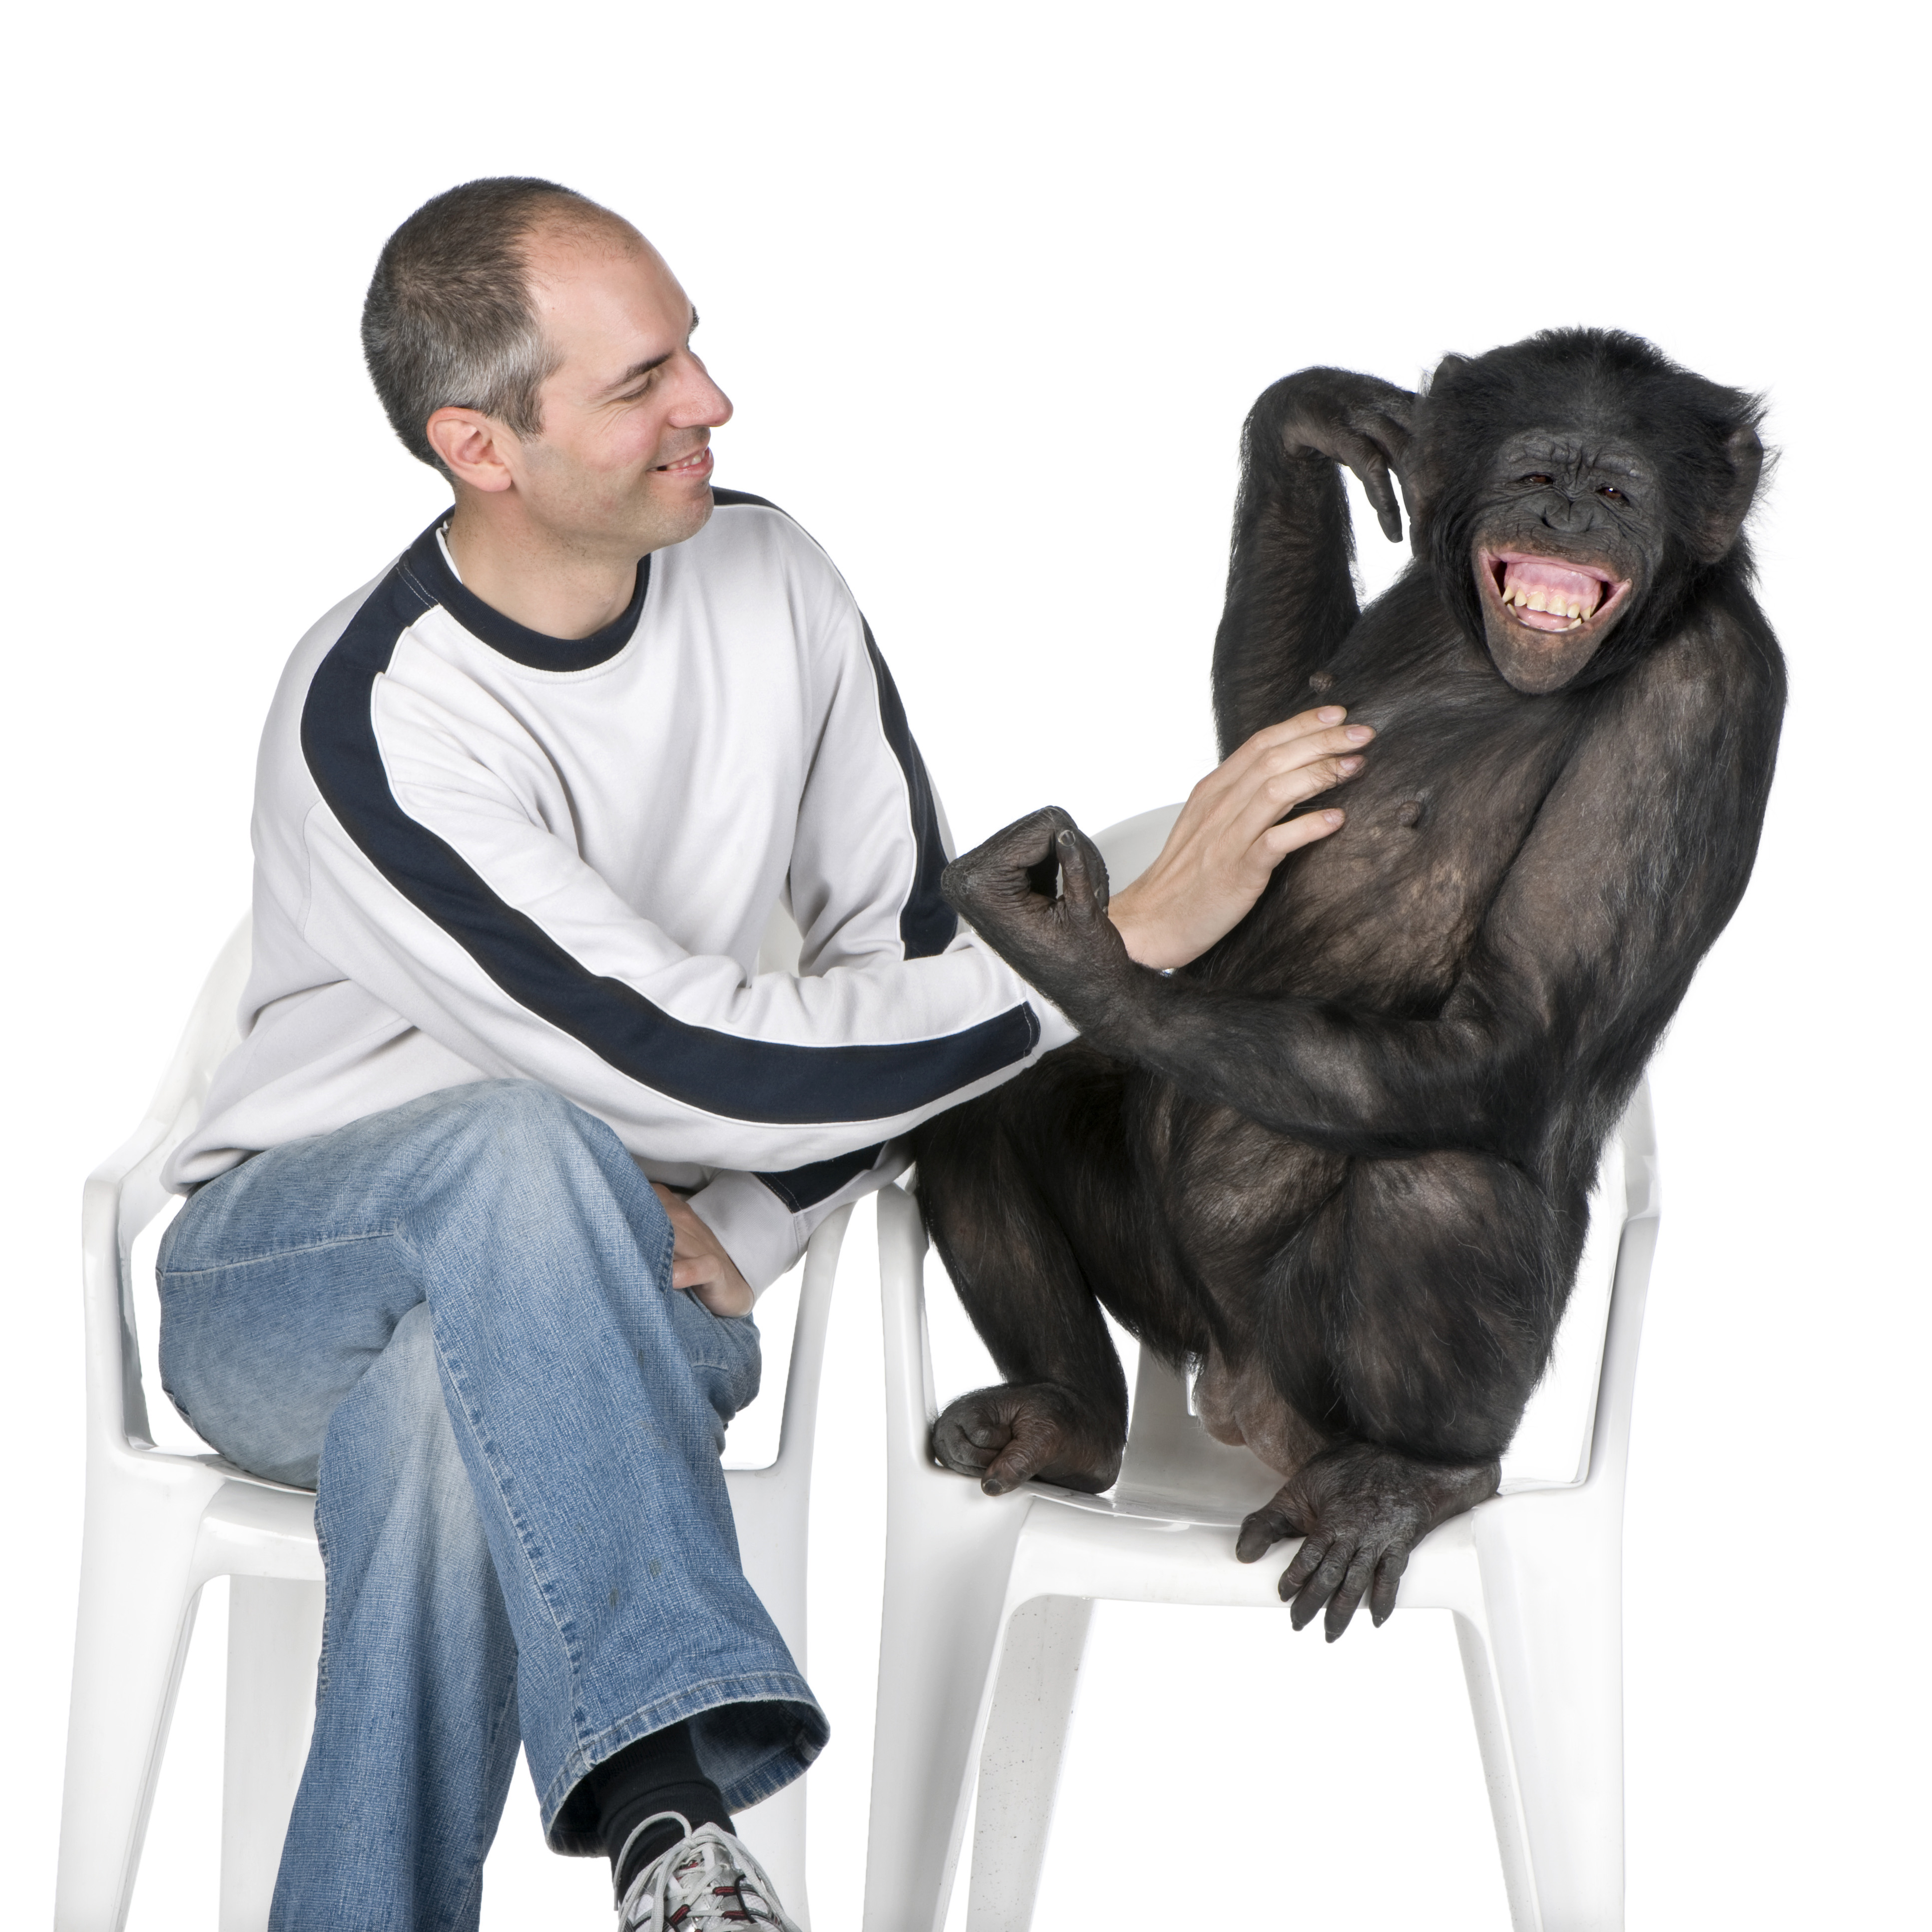 Man with Primate